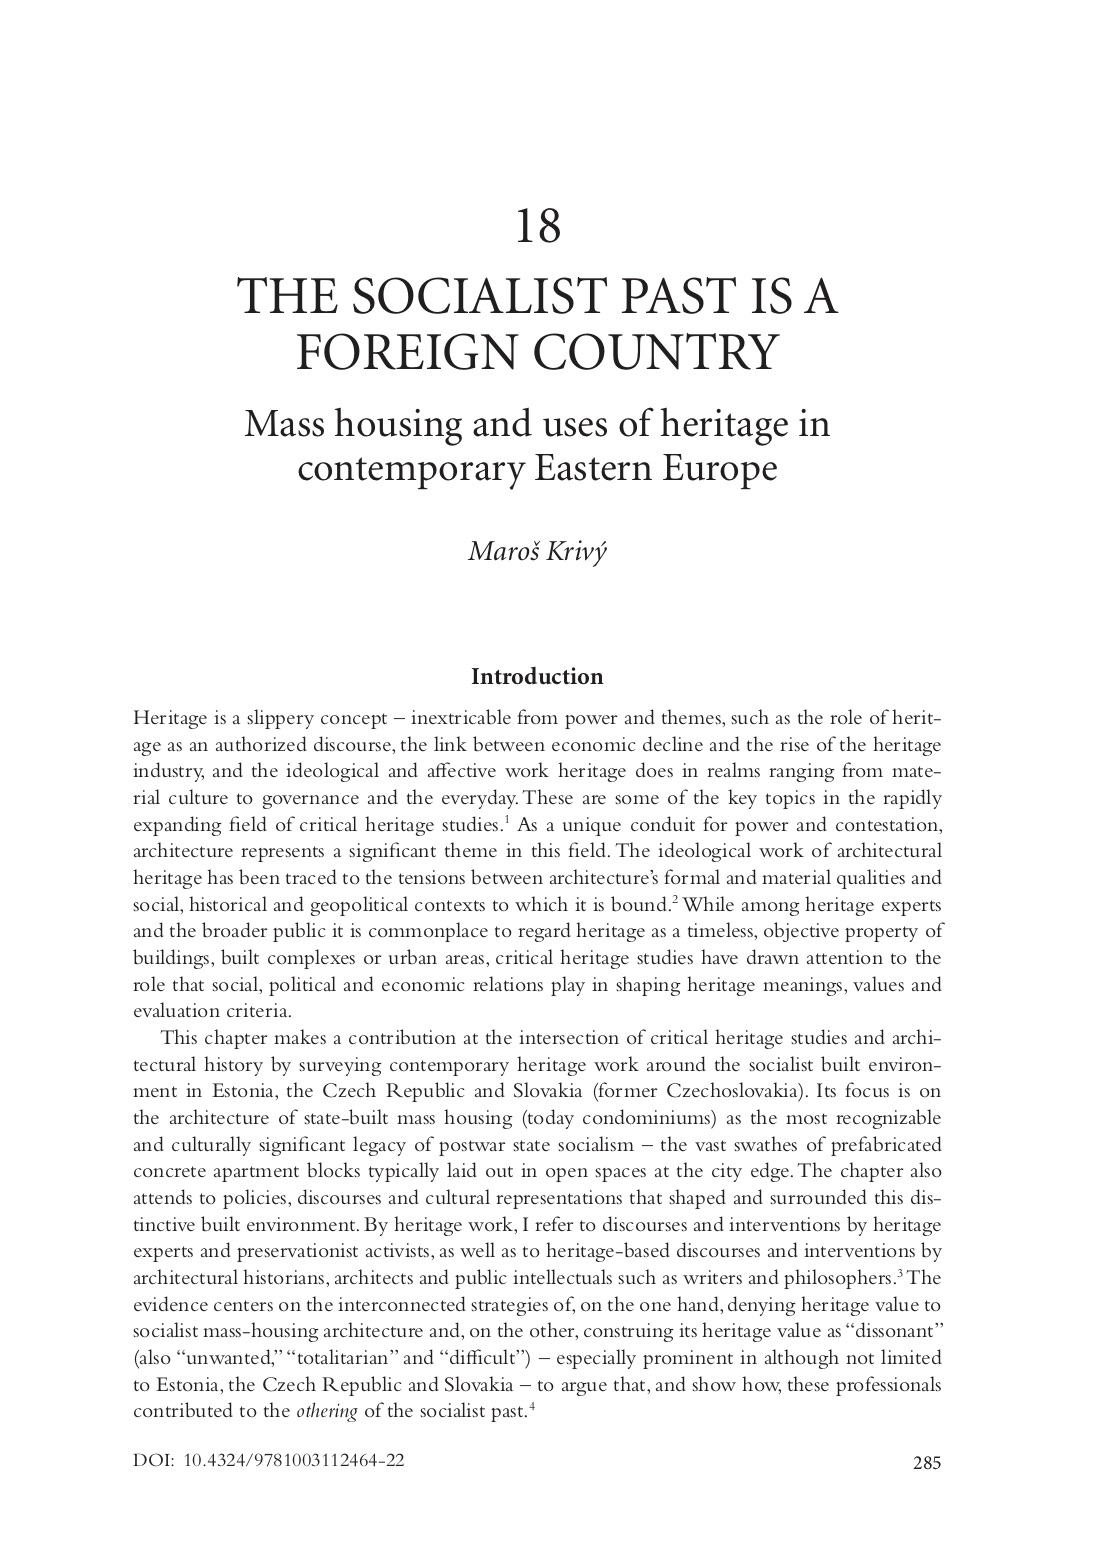 The Socialist Past is a Foreign Country: Mass Housing and Uses of 